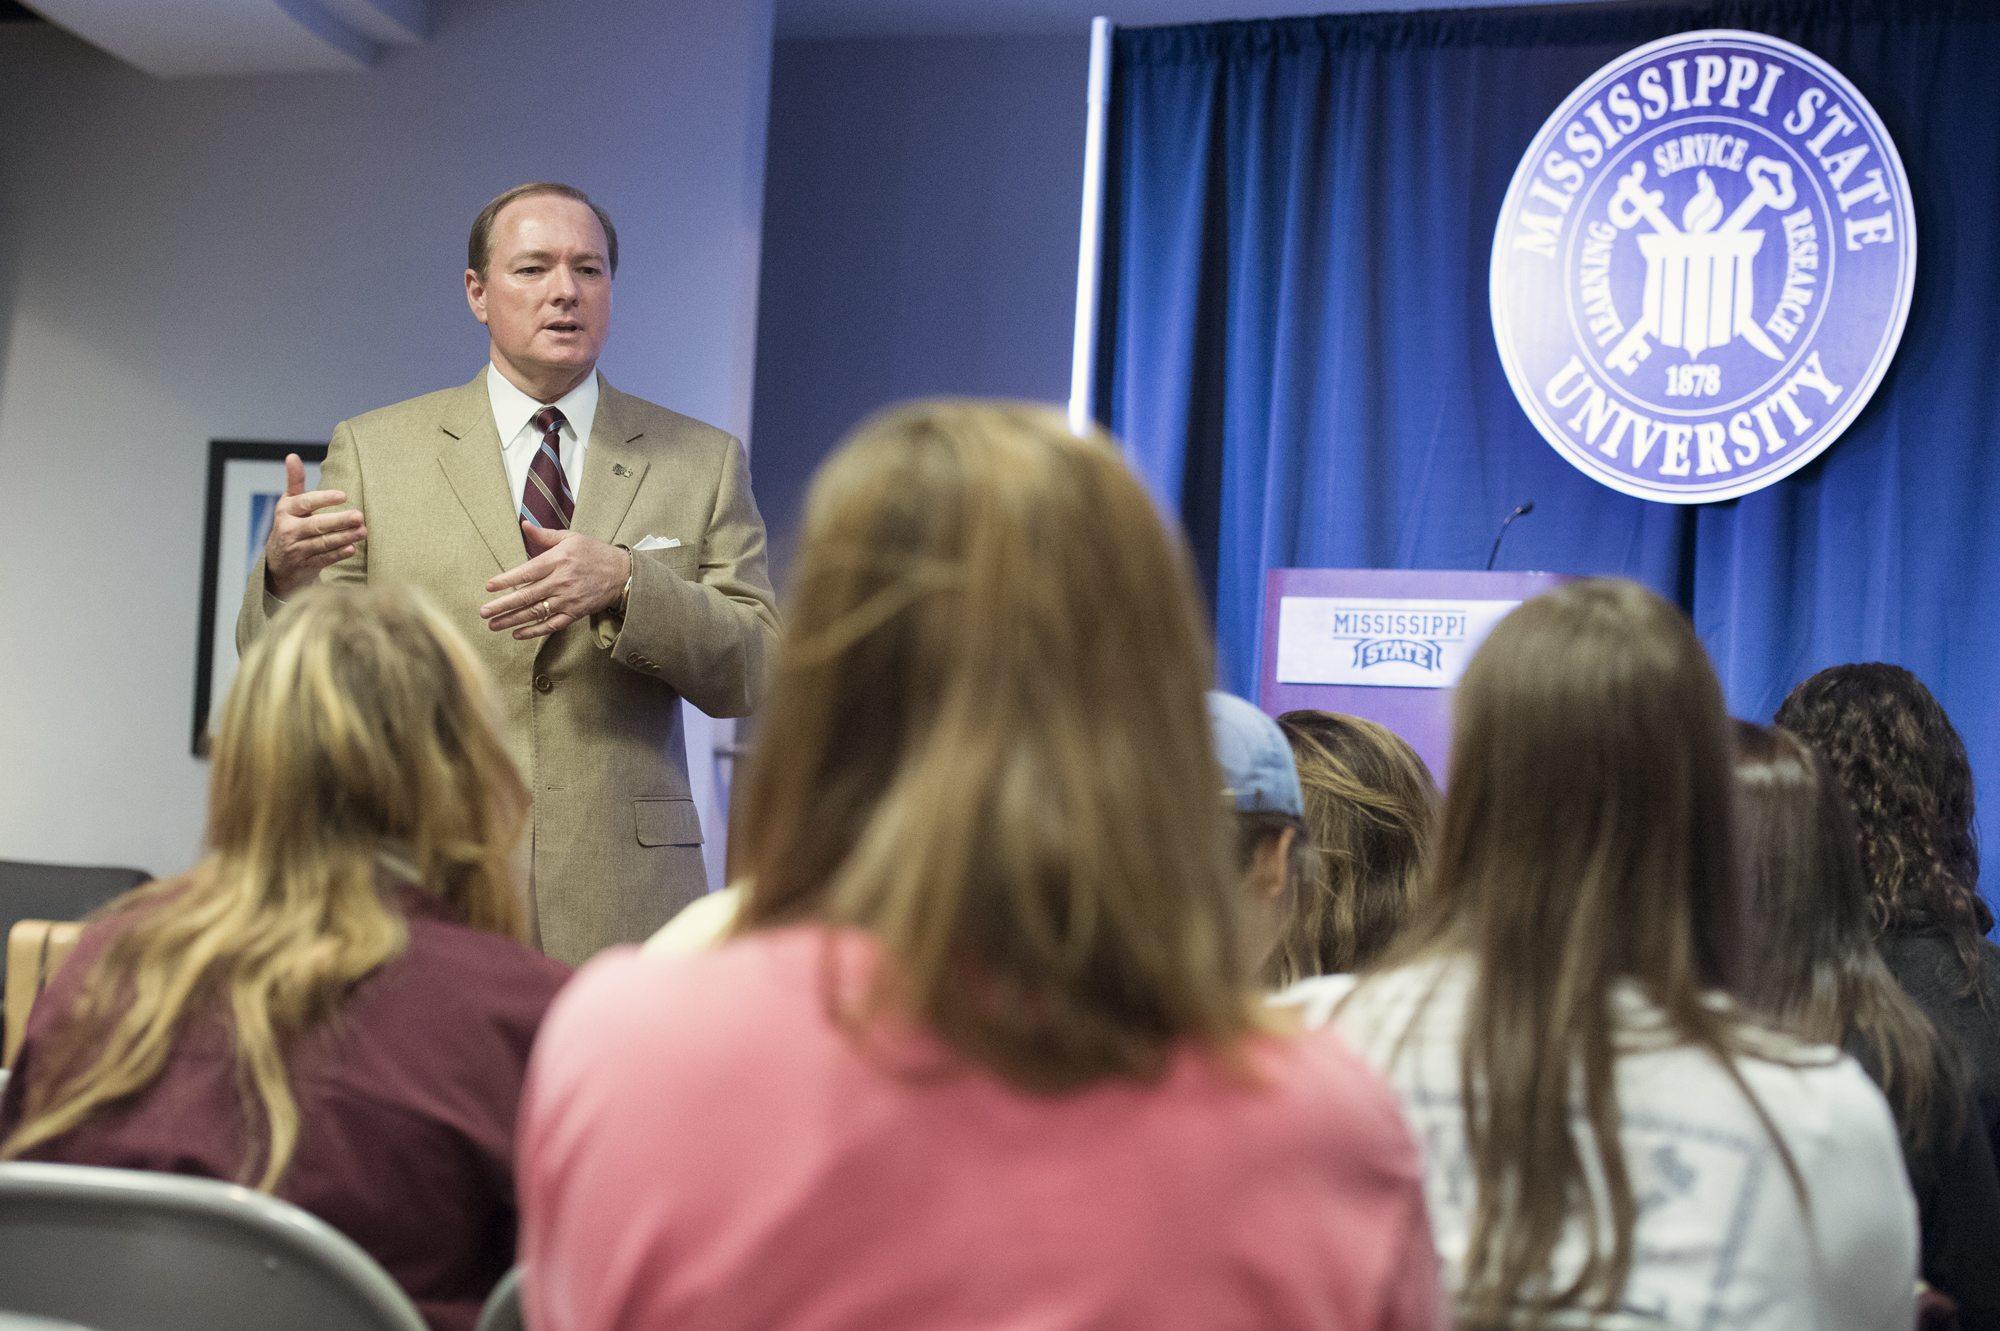 MSU President Mark E. Keenum and other MSU officials met today [Nov. 19] with students who have been displaced by this morning's water damage in Hurst Hall.  Keenum gave students updated information on the situation and discussed the housing options and accommodations available to them.  